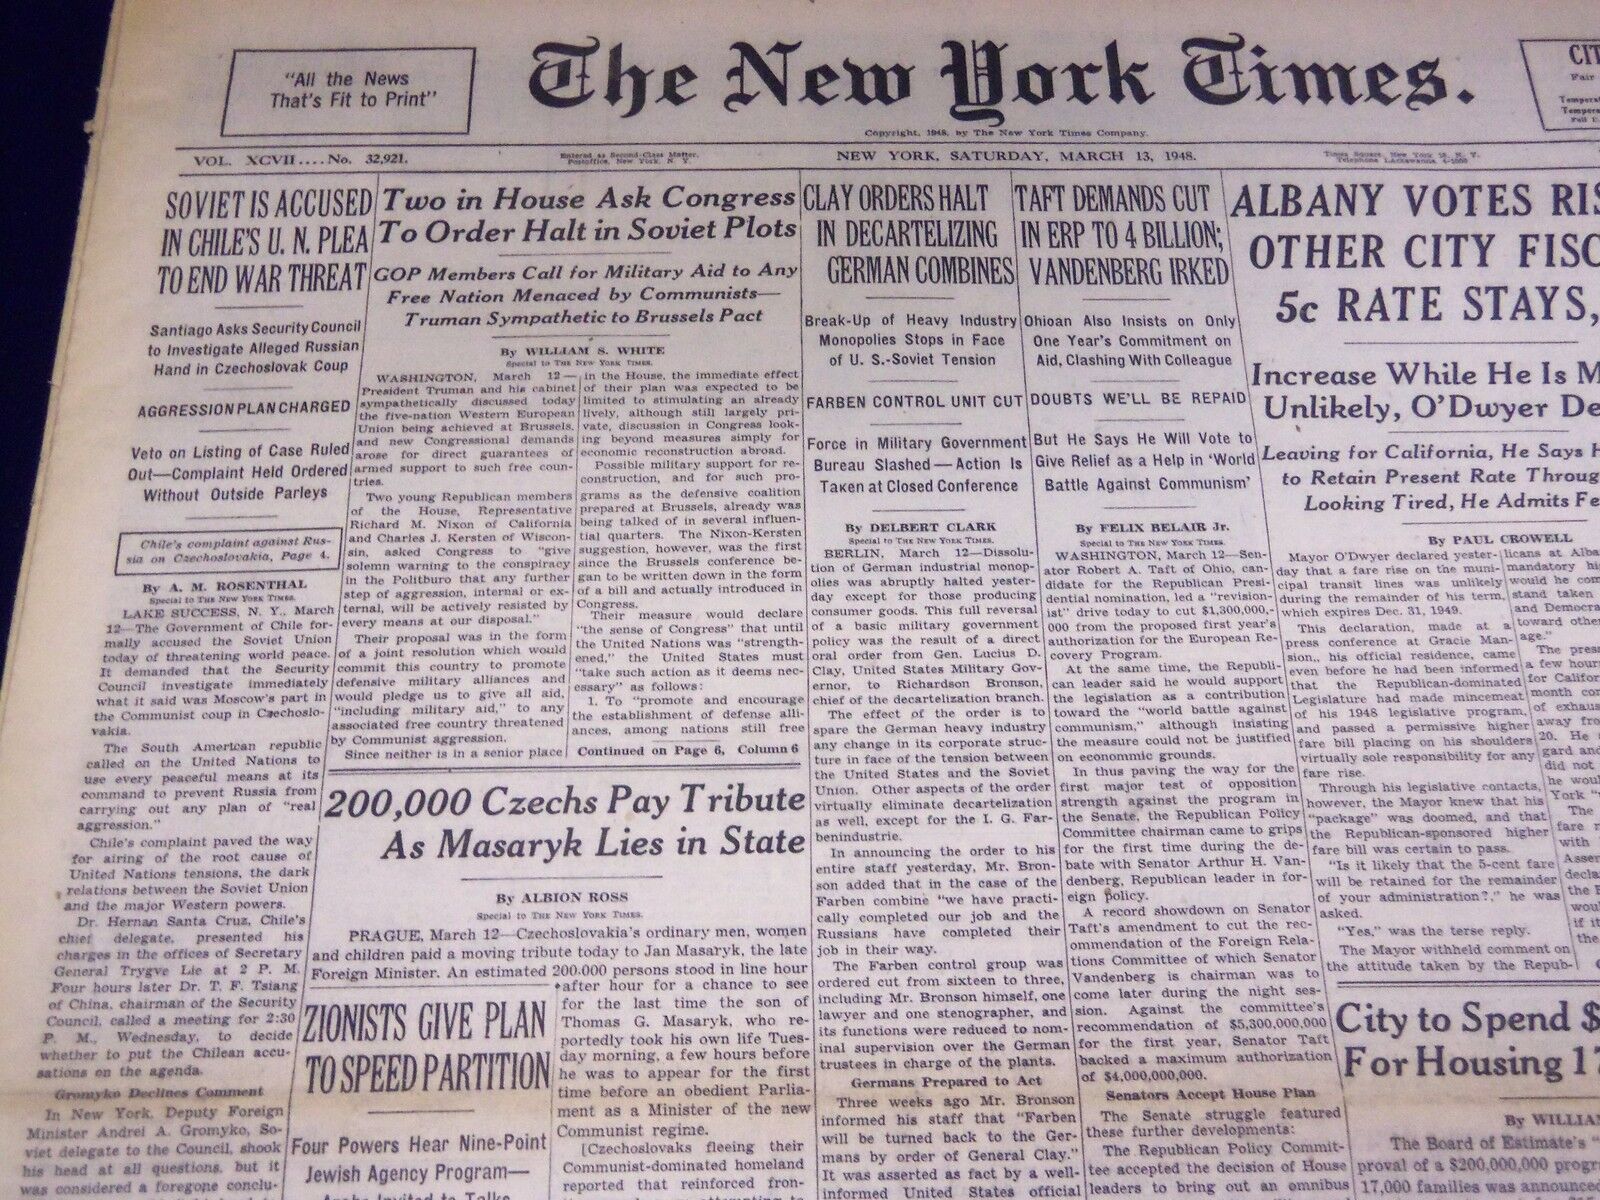 1948 MARCH 13 NEW YORK TIMES - 5C RATE STAYS SAYS MAYOR - NT 3363